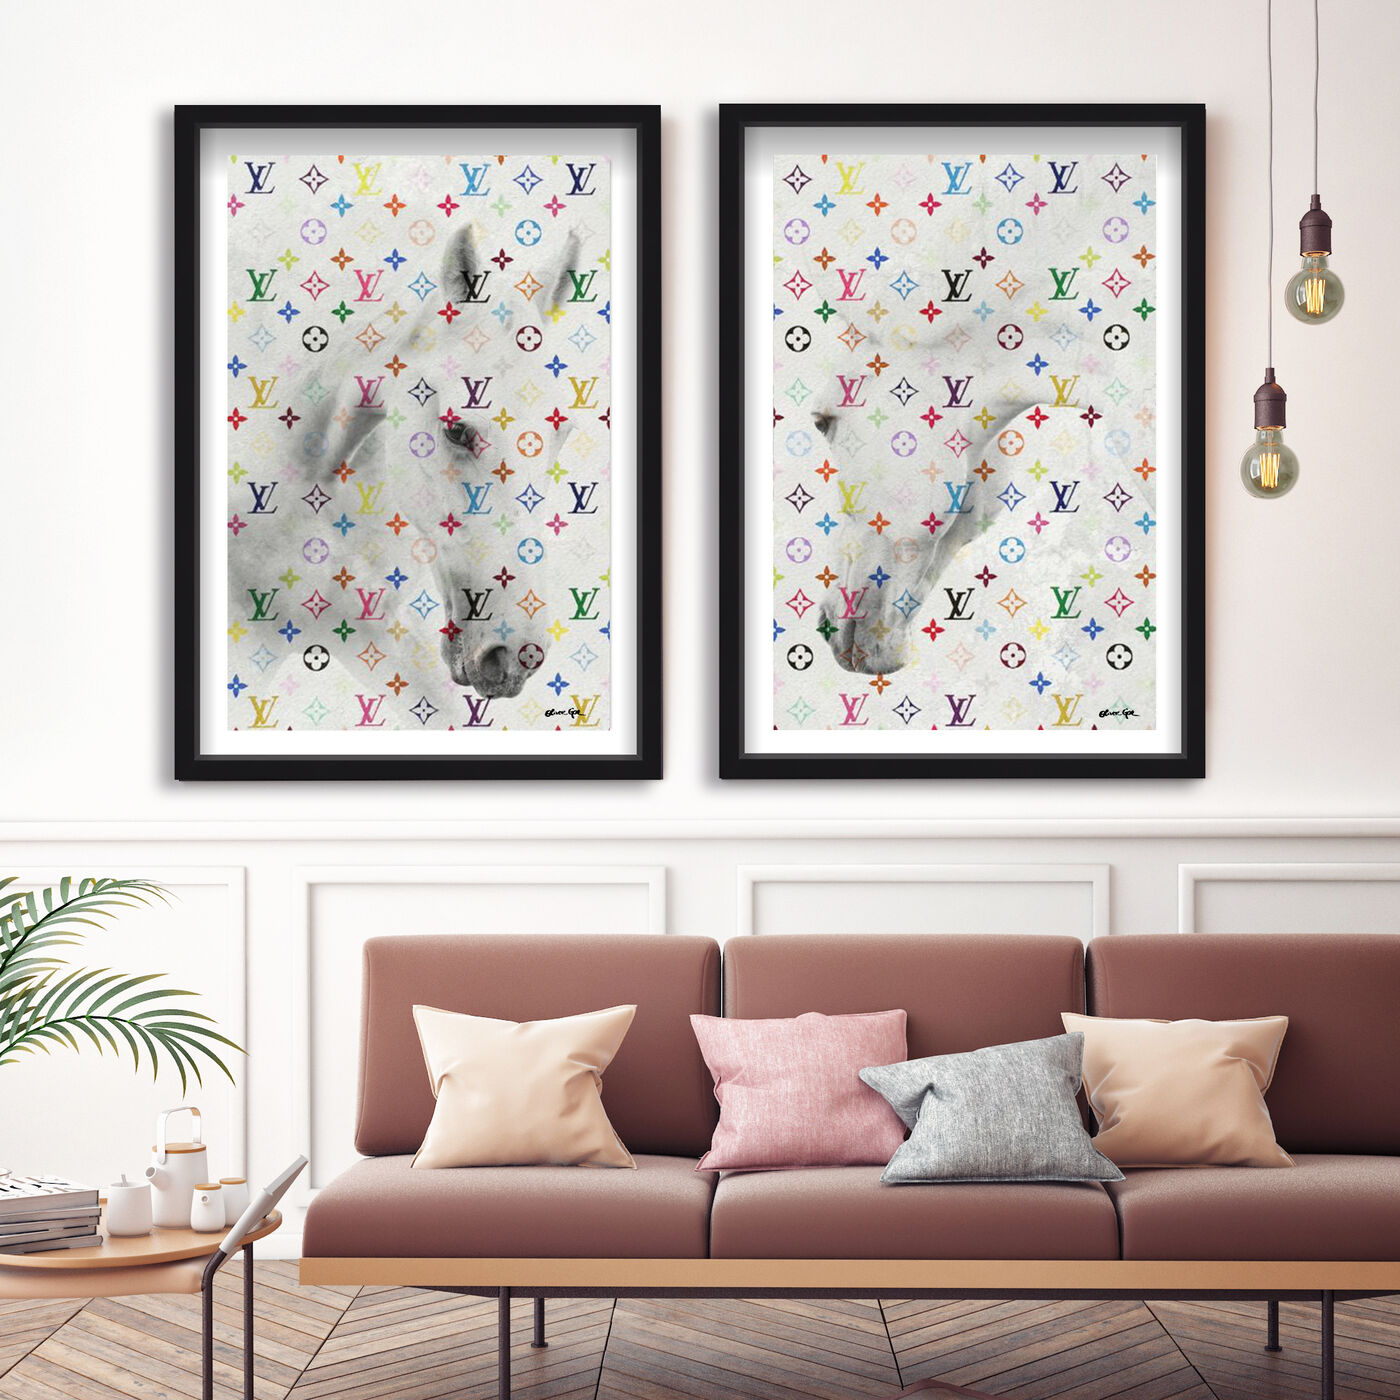 Colorful Louis Vuitton Wall Decals